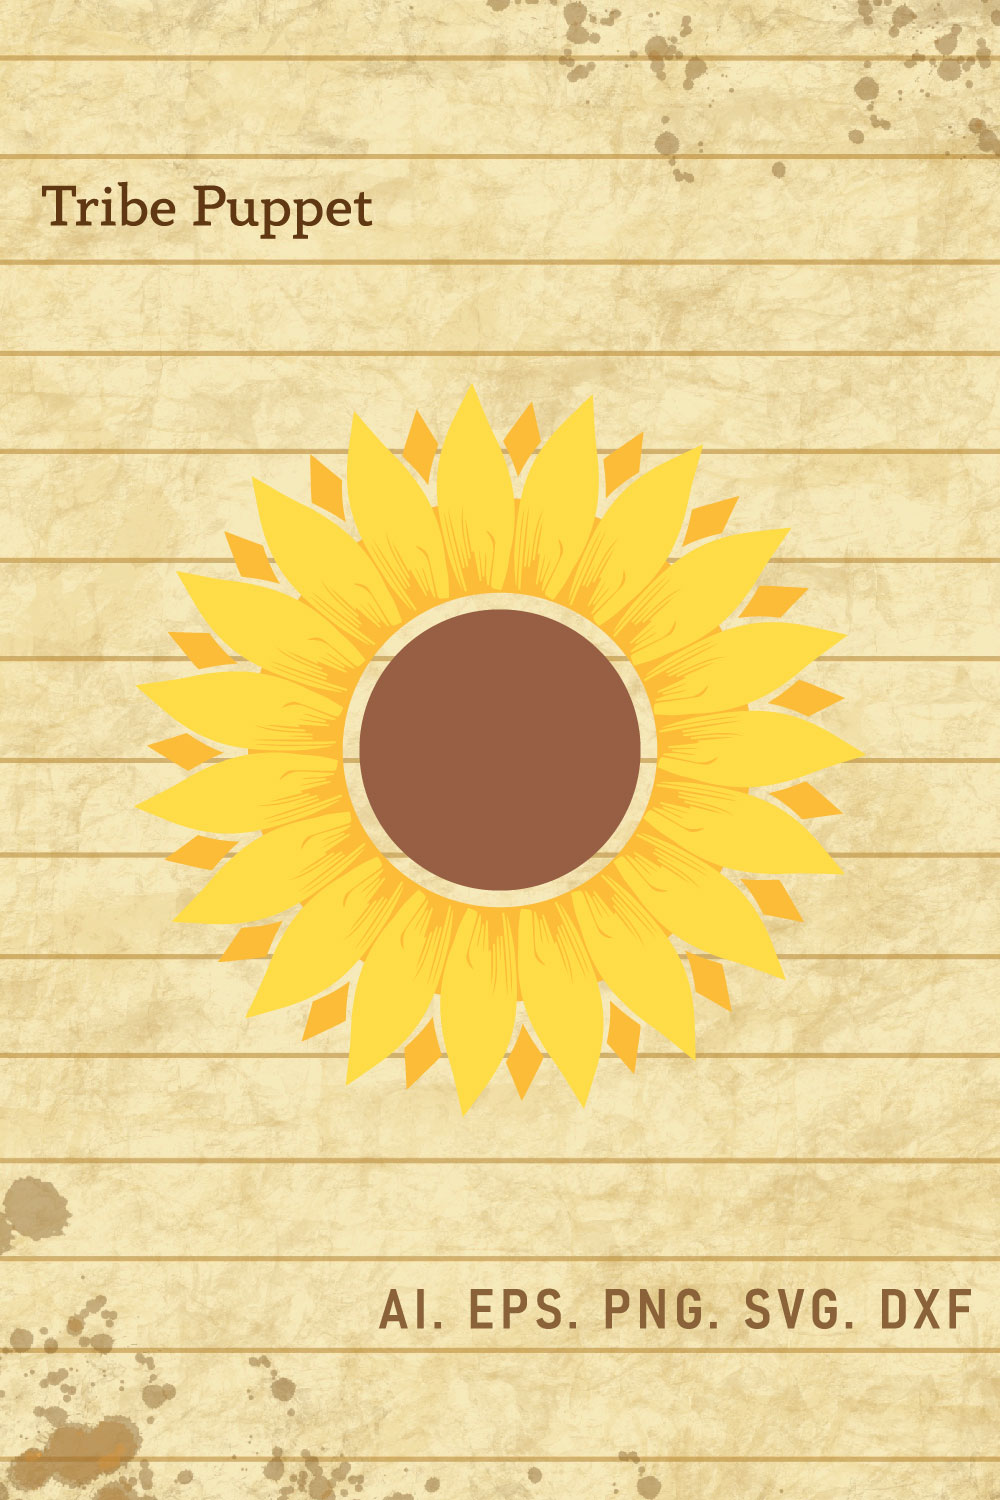 Sunflower 11 pinterest preview image.